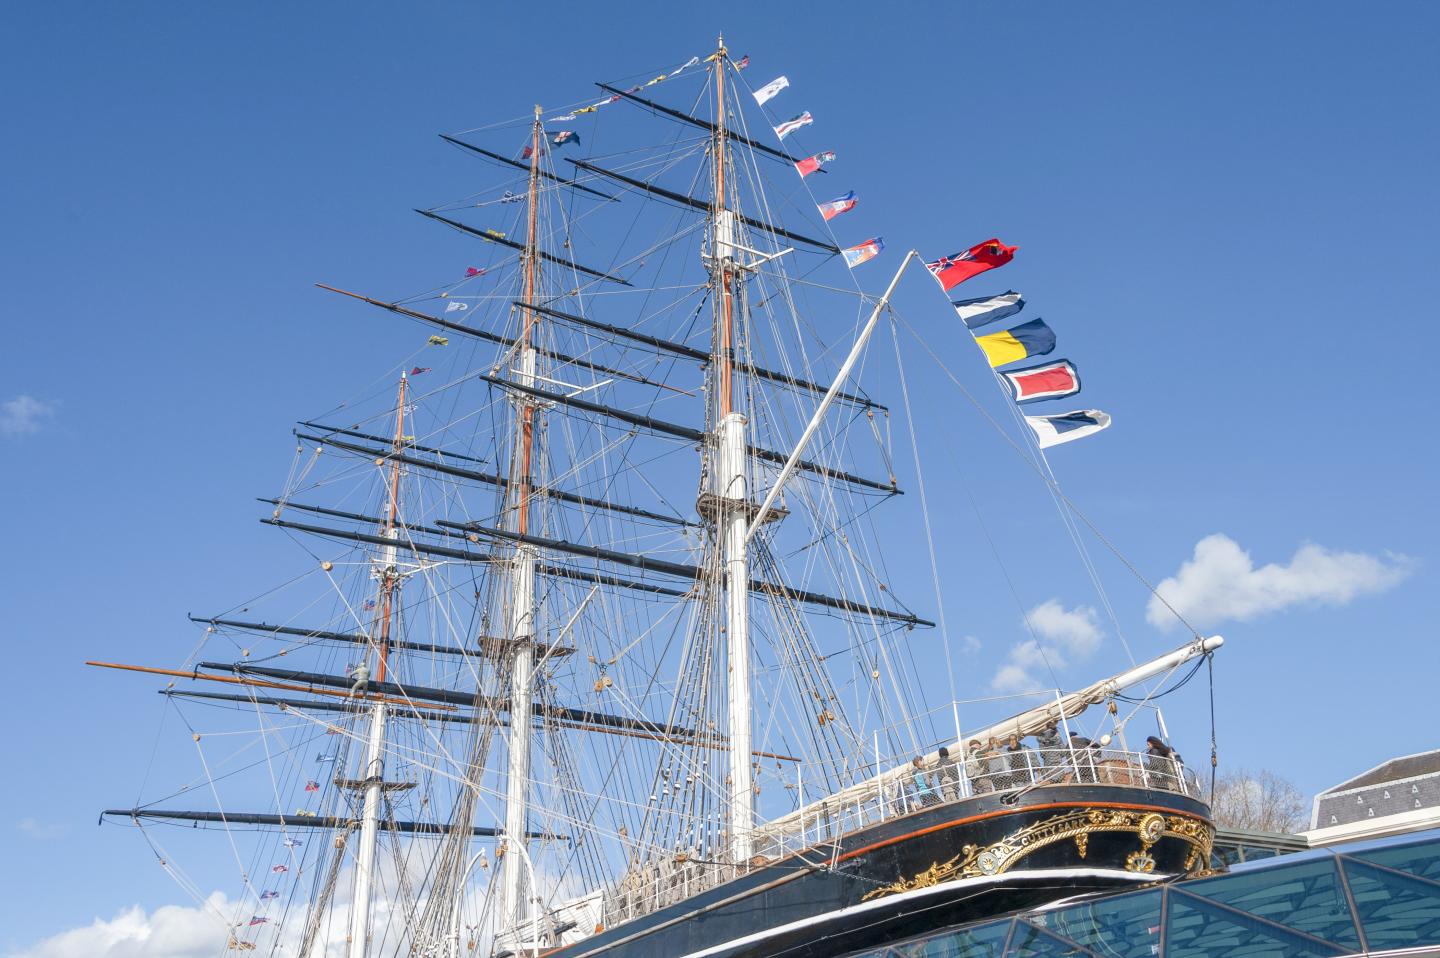 Signal flags aboard the Cutty Sark